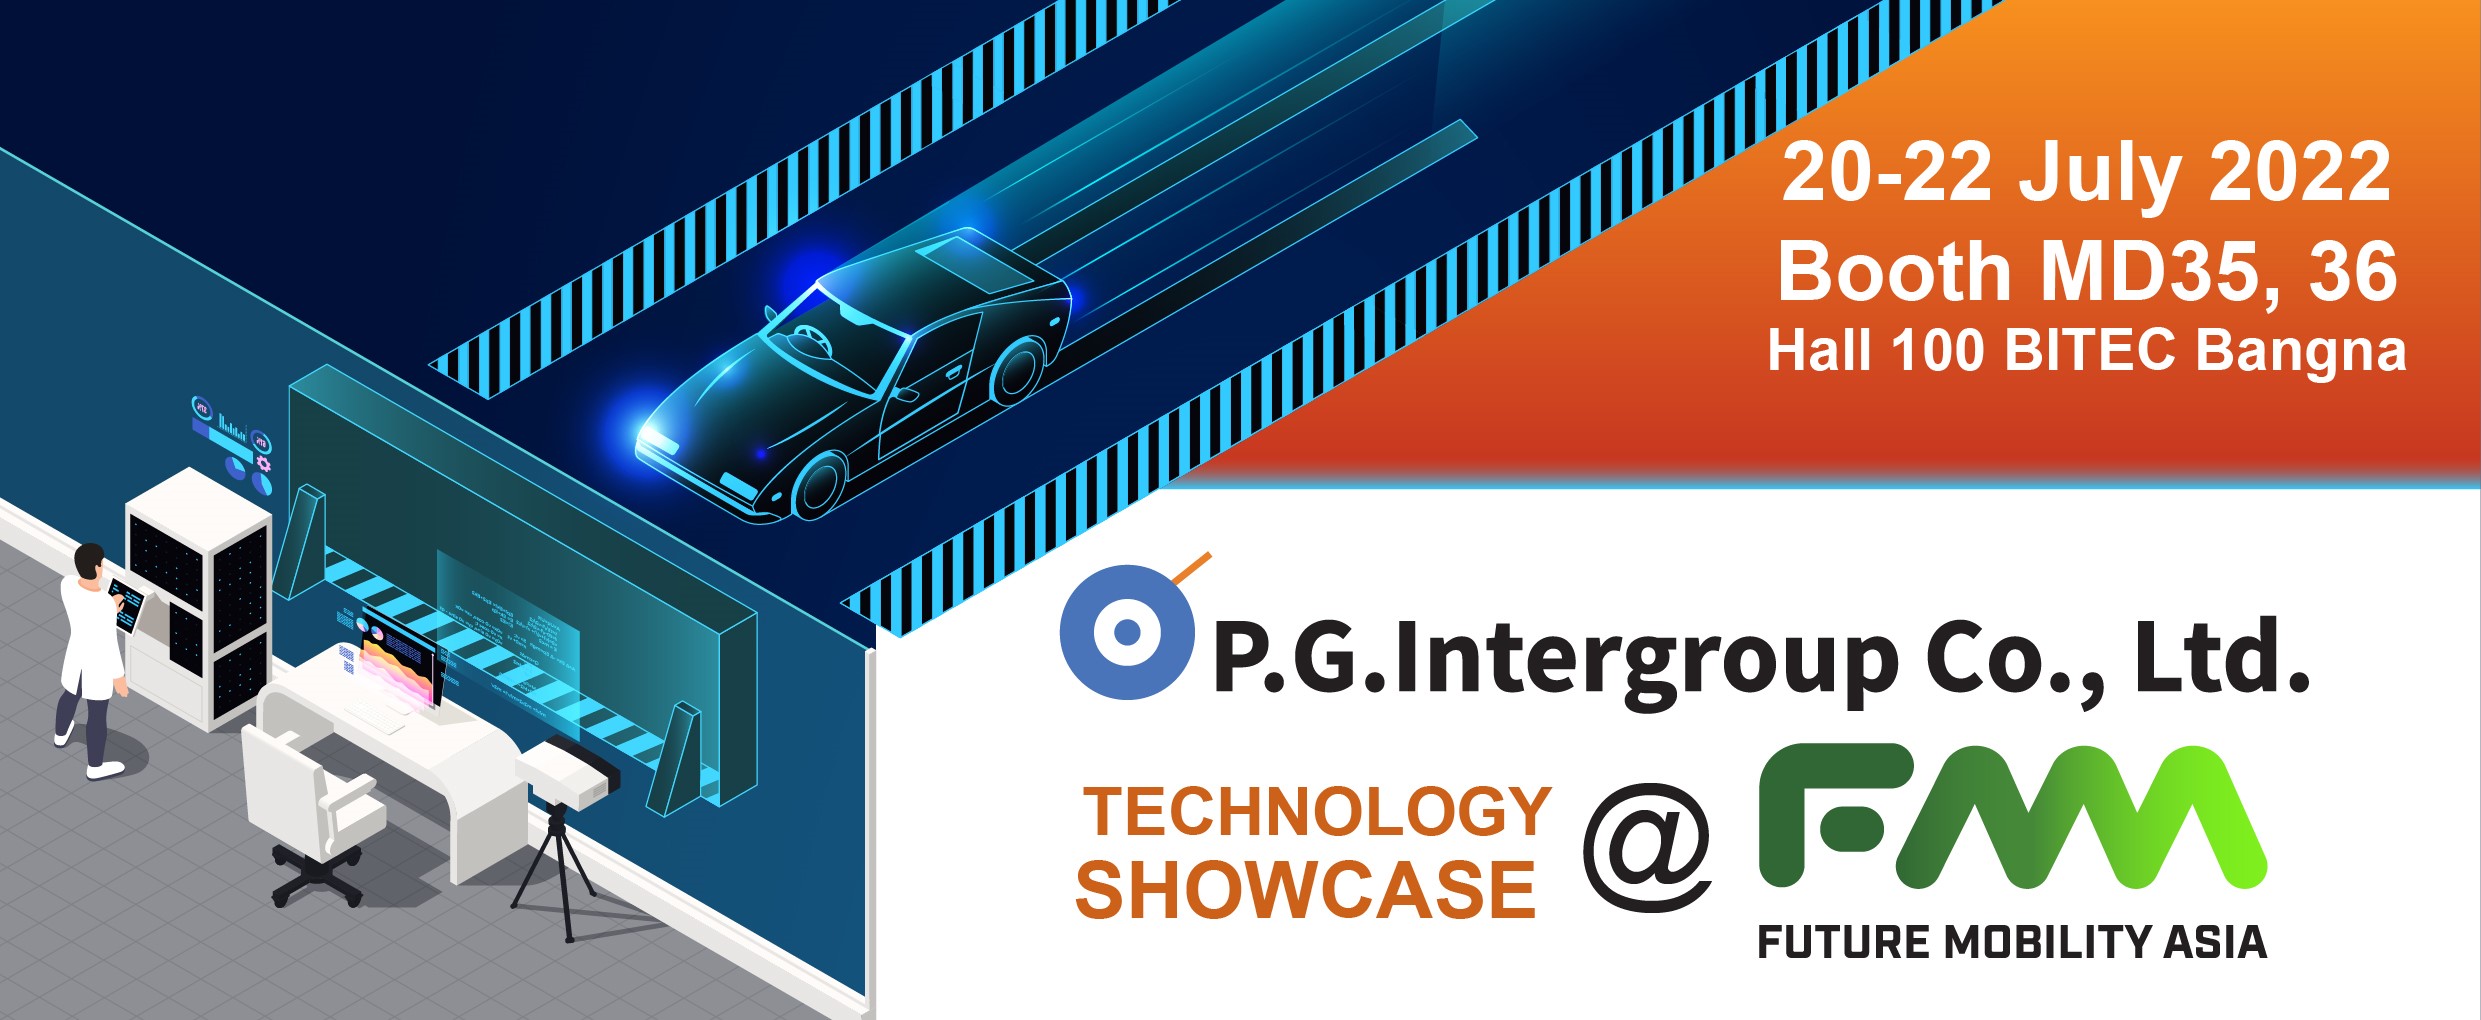 P.G. Intergroup has Technology Showcase and Exhibition at FMA (Future Mobility Asia) @BITEC. 20-22 July 2022